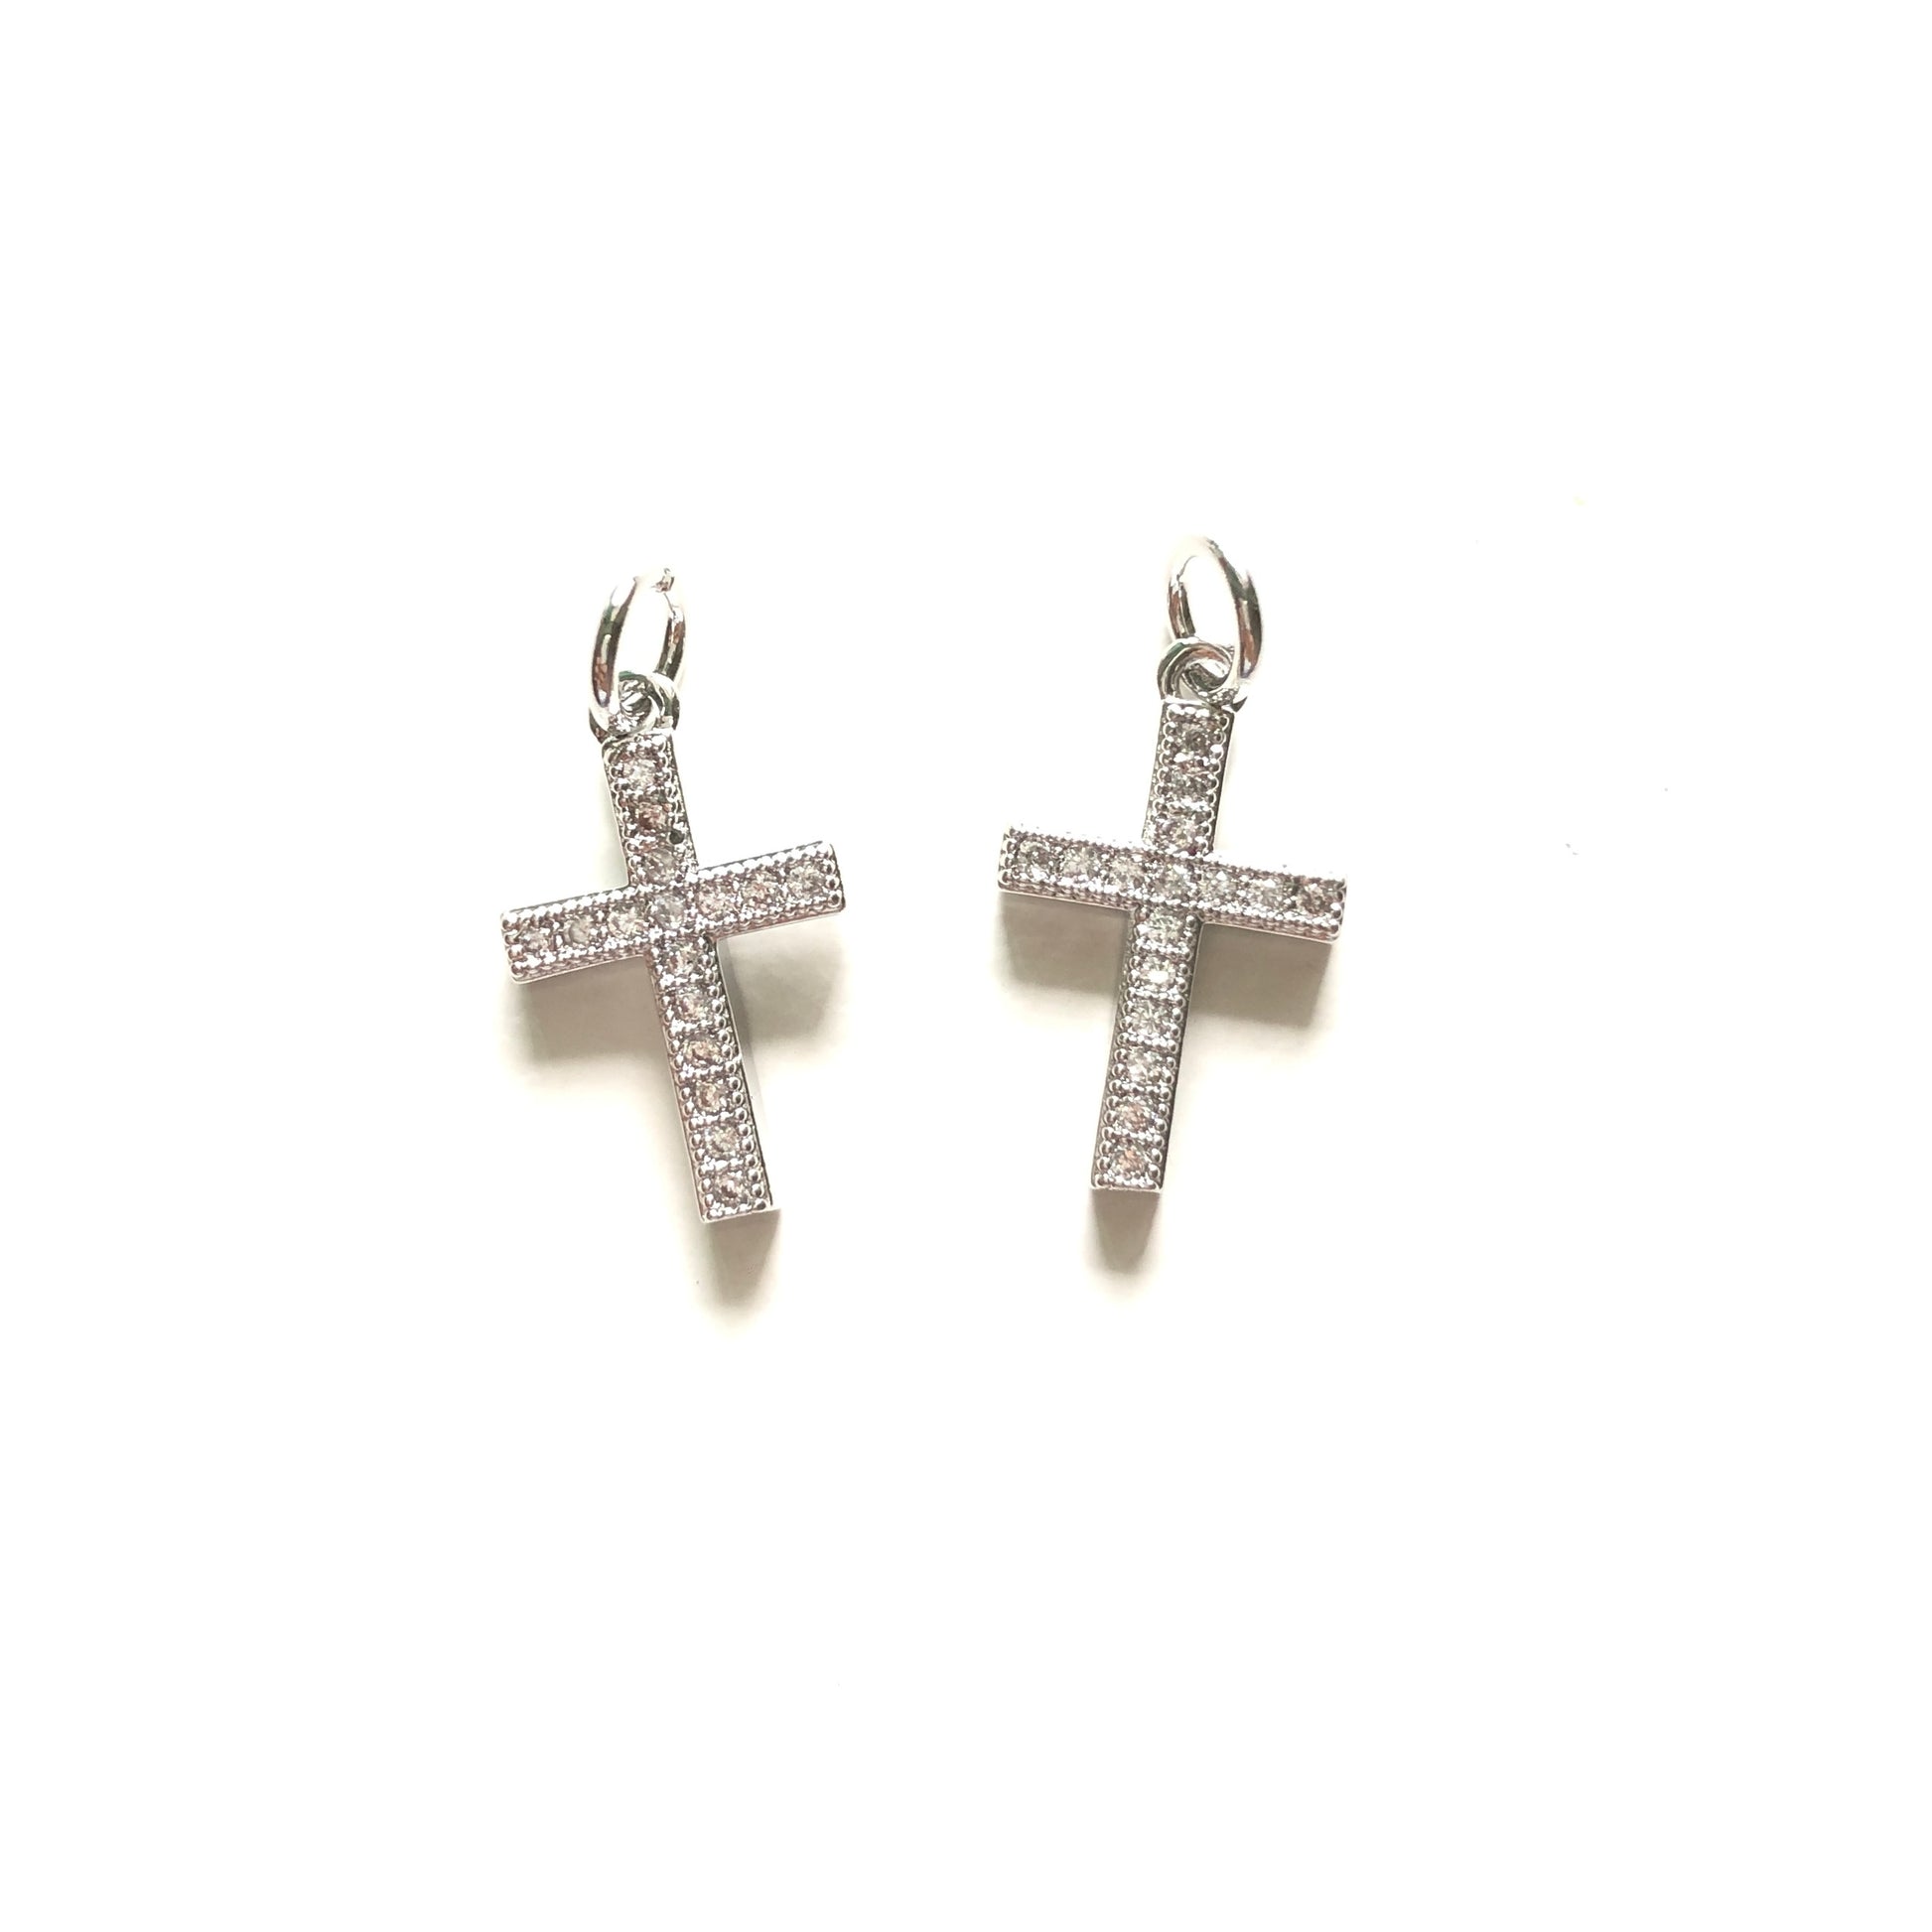 10pcs/lot 14.3*10mm CZ Paved Cross Charms Silver CZ Paved Charms Crosses Small Sizes Charms Beads Beyond